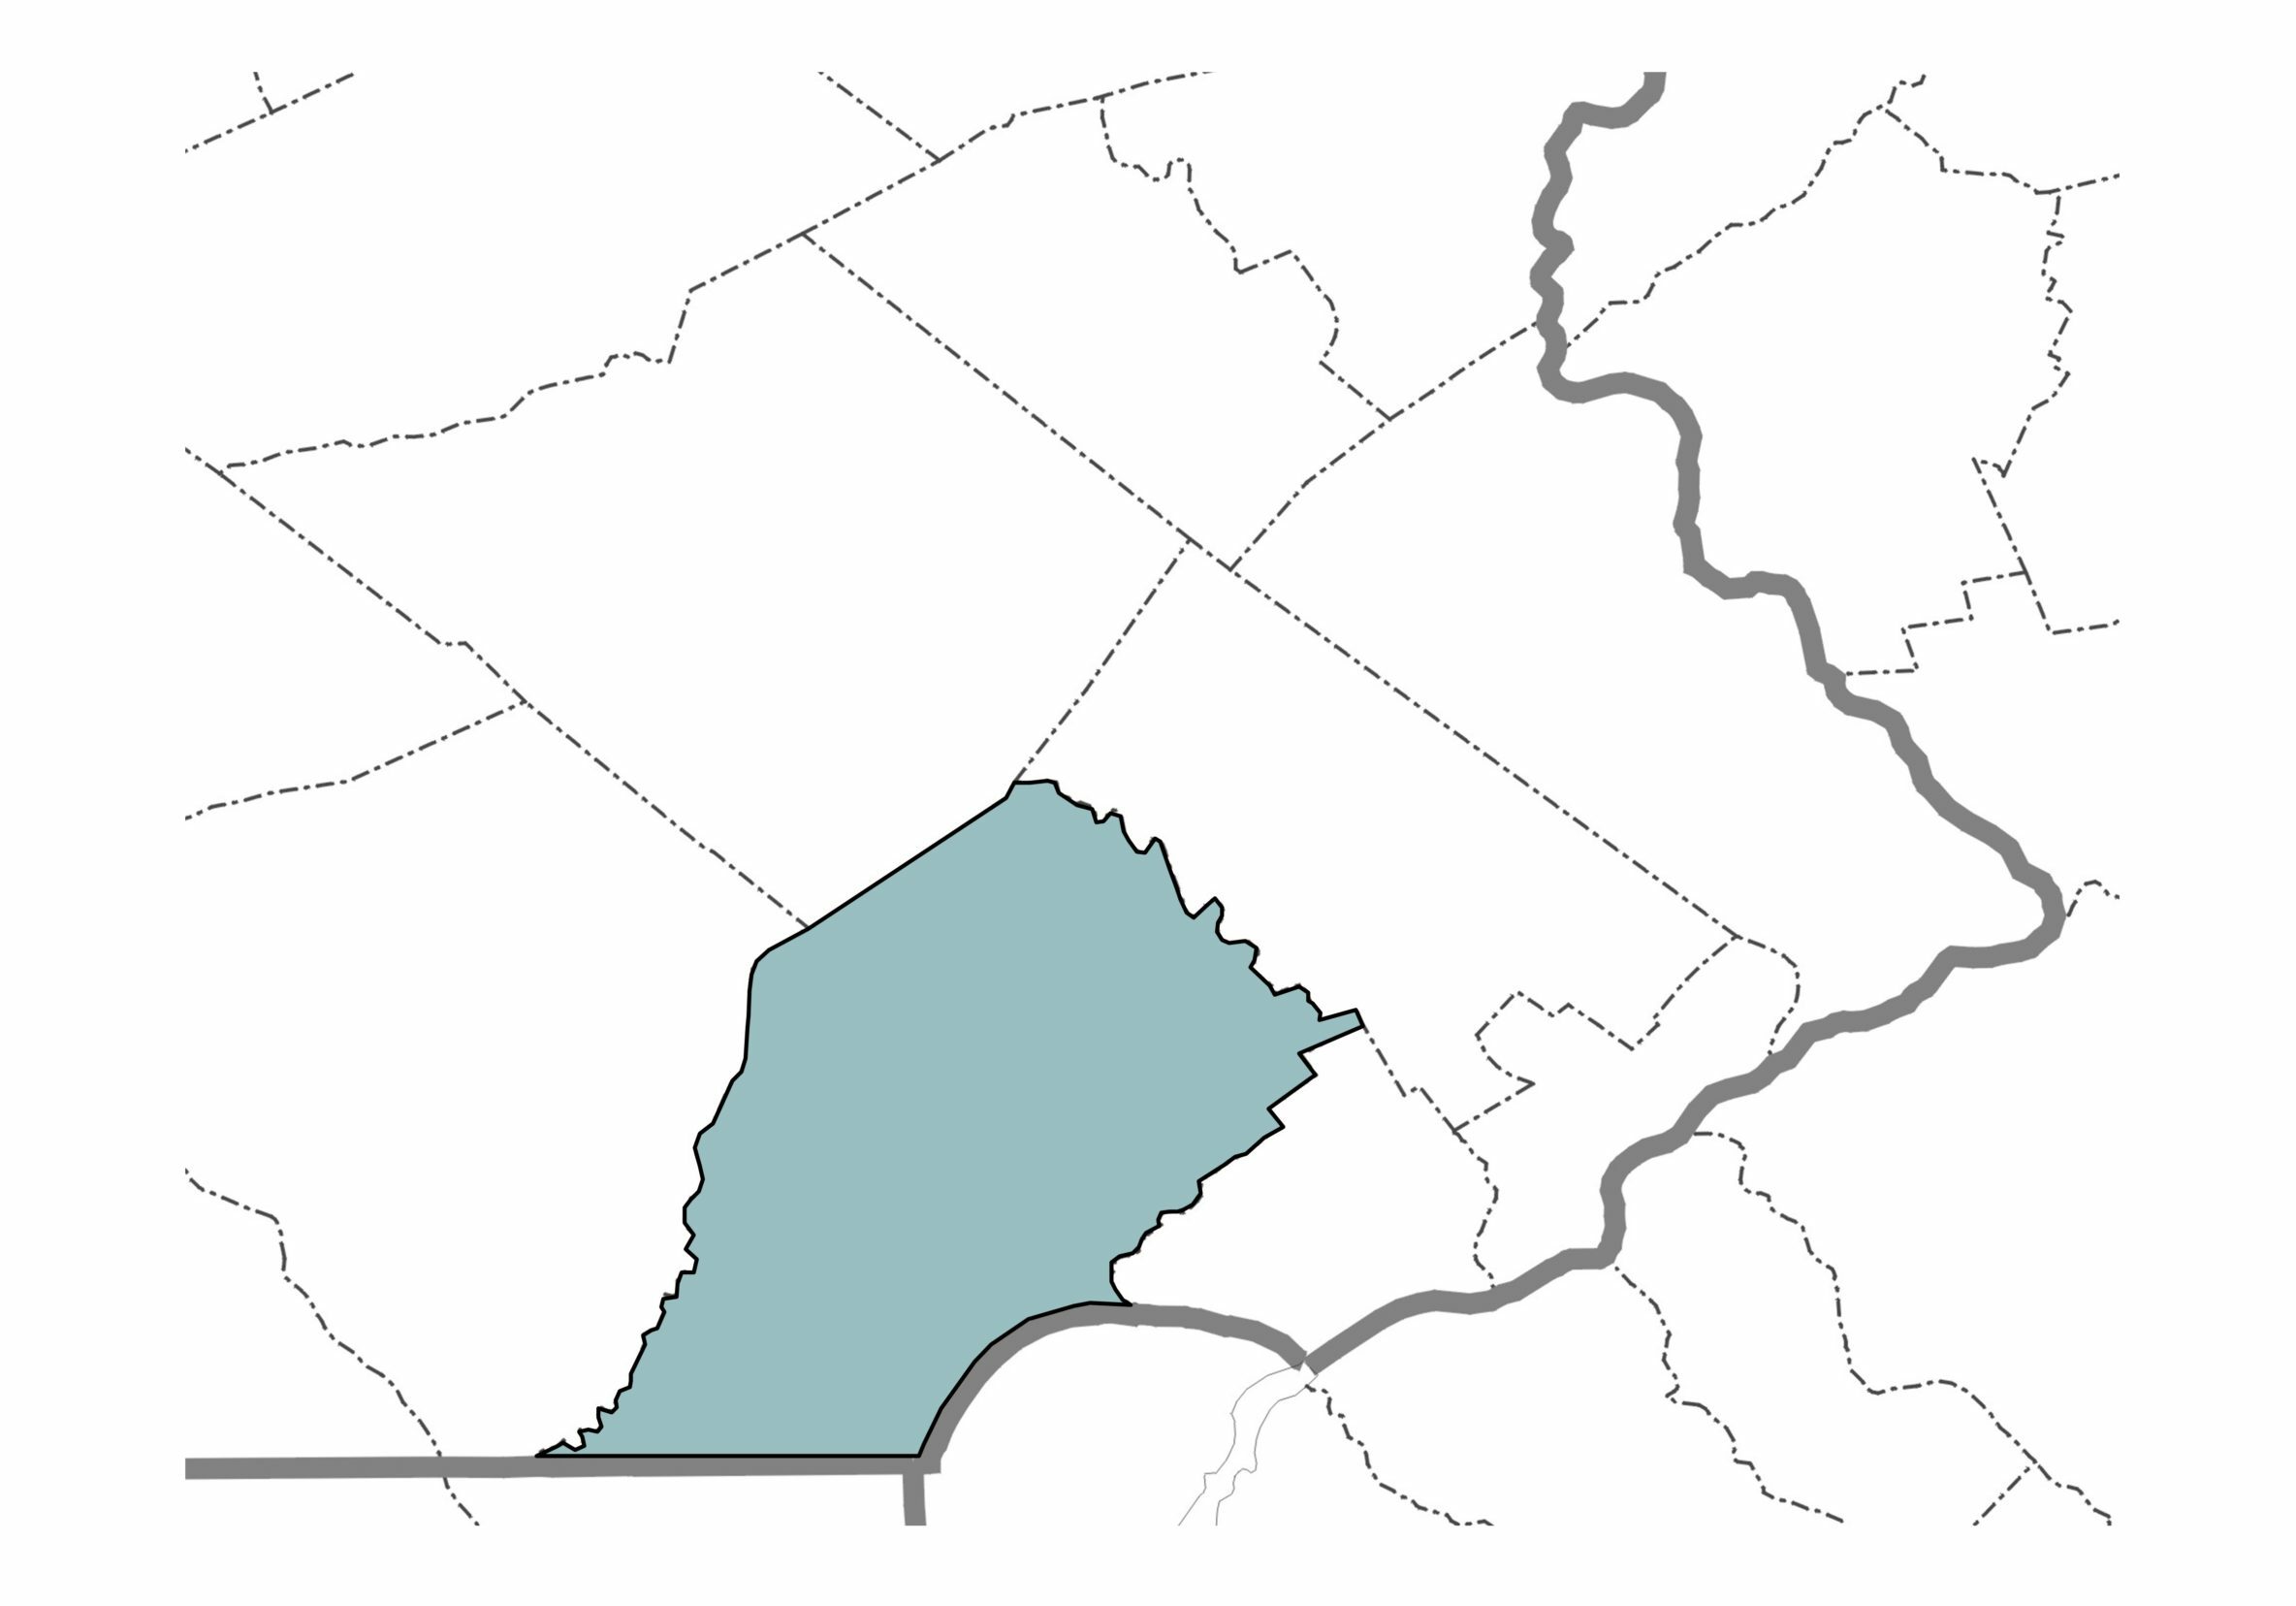 Chester County Highlighted on Local Map That Shows County Borders